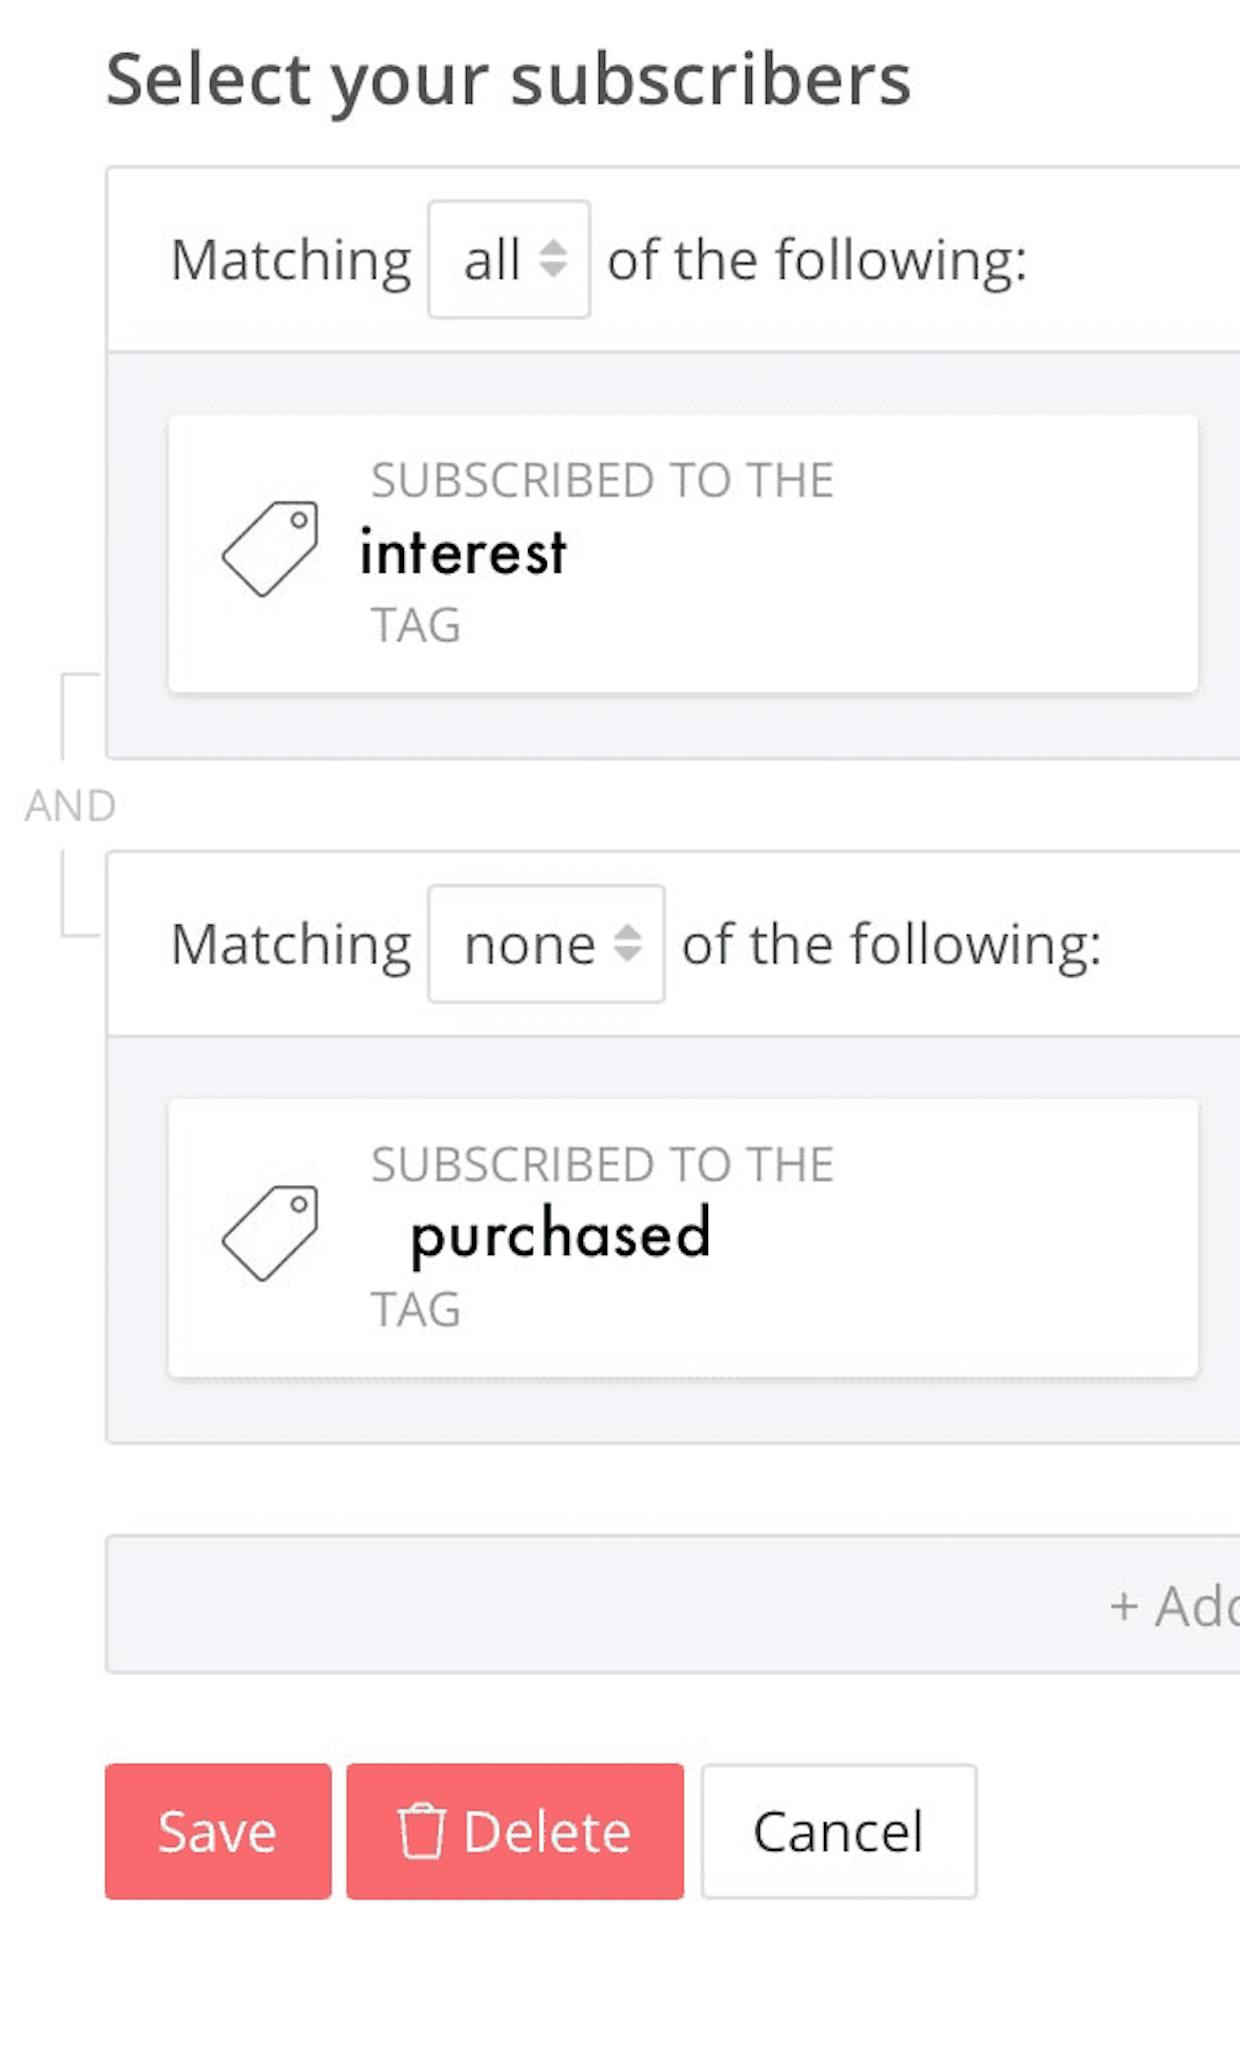 Trying to figure out how to send an email to a segment of people who are tagged with a certain tag, but not tagged with a different tag. For instance, they clicked a link that I have tagged as "interest" but they have not purchased so they have not yet been tagged as a purchaser. Make sense? 